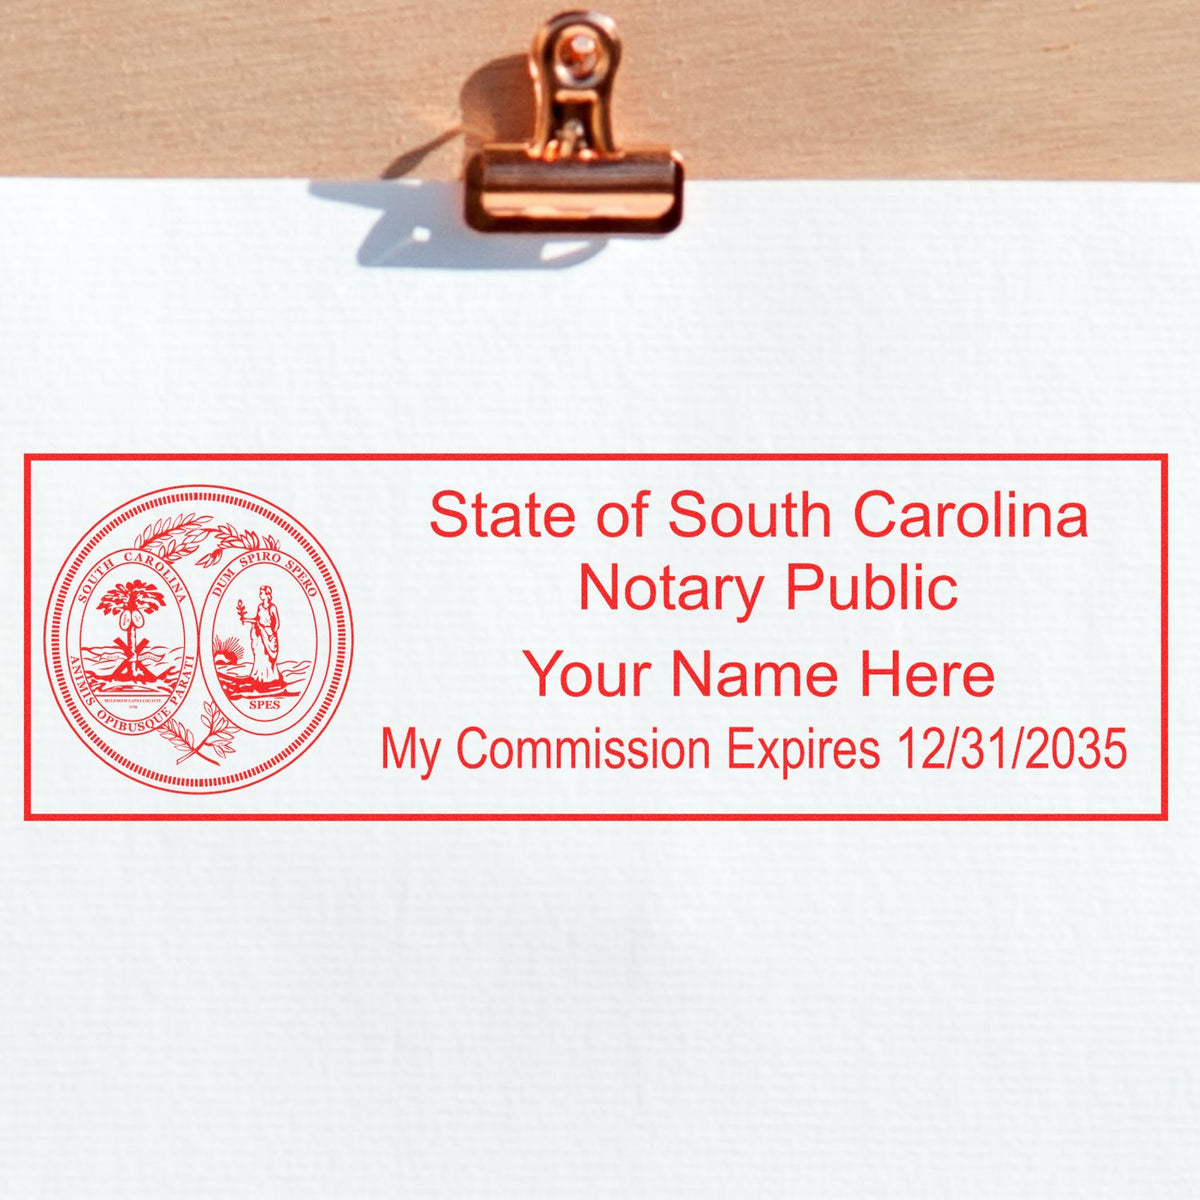 The Self-Inking State Seal South Carolina Notary Stamp stamp impression comes to life with a crisp, detailed photo on paper - showcasing true professional quality.